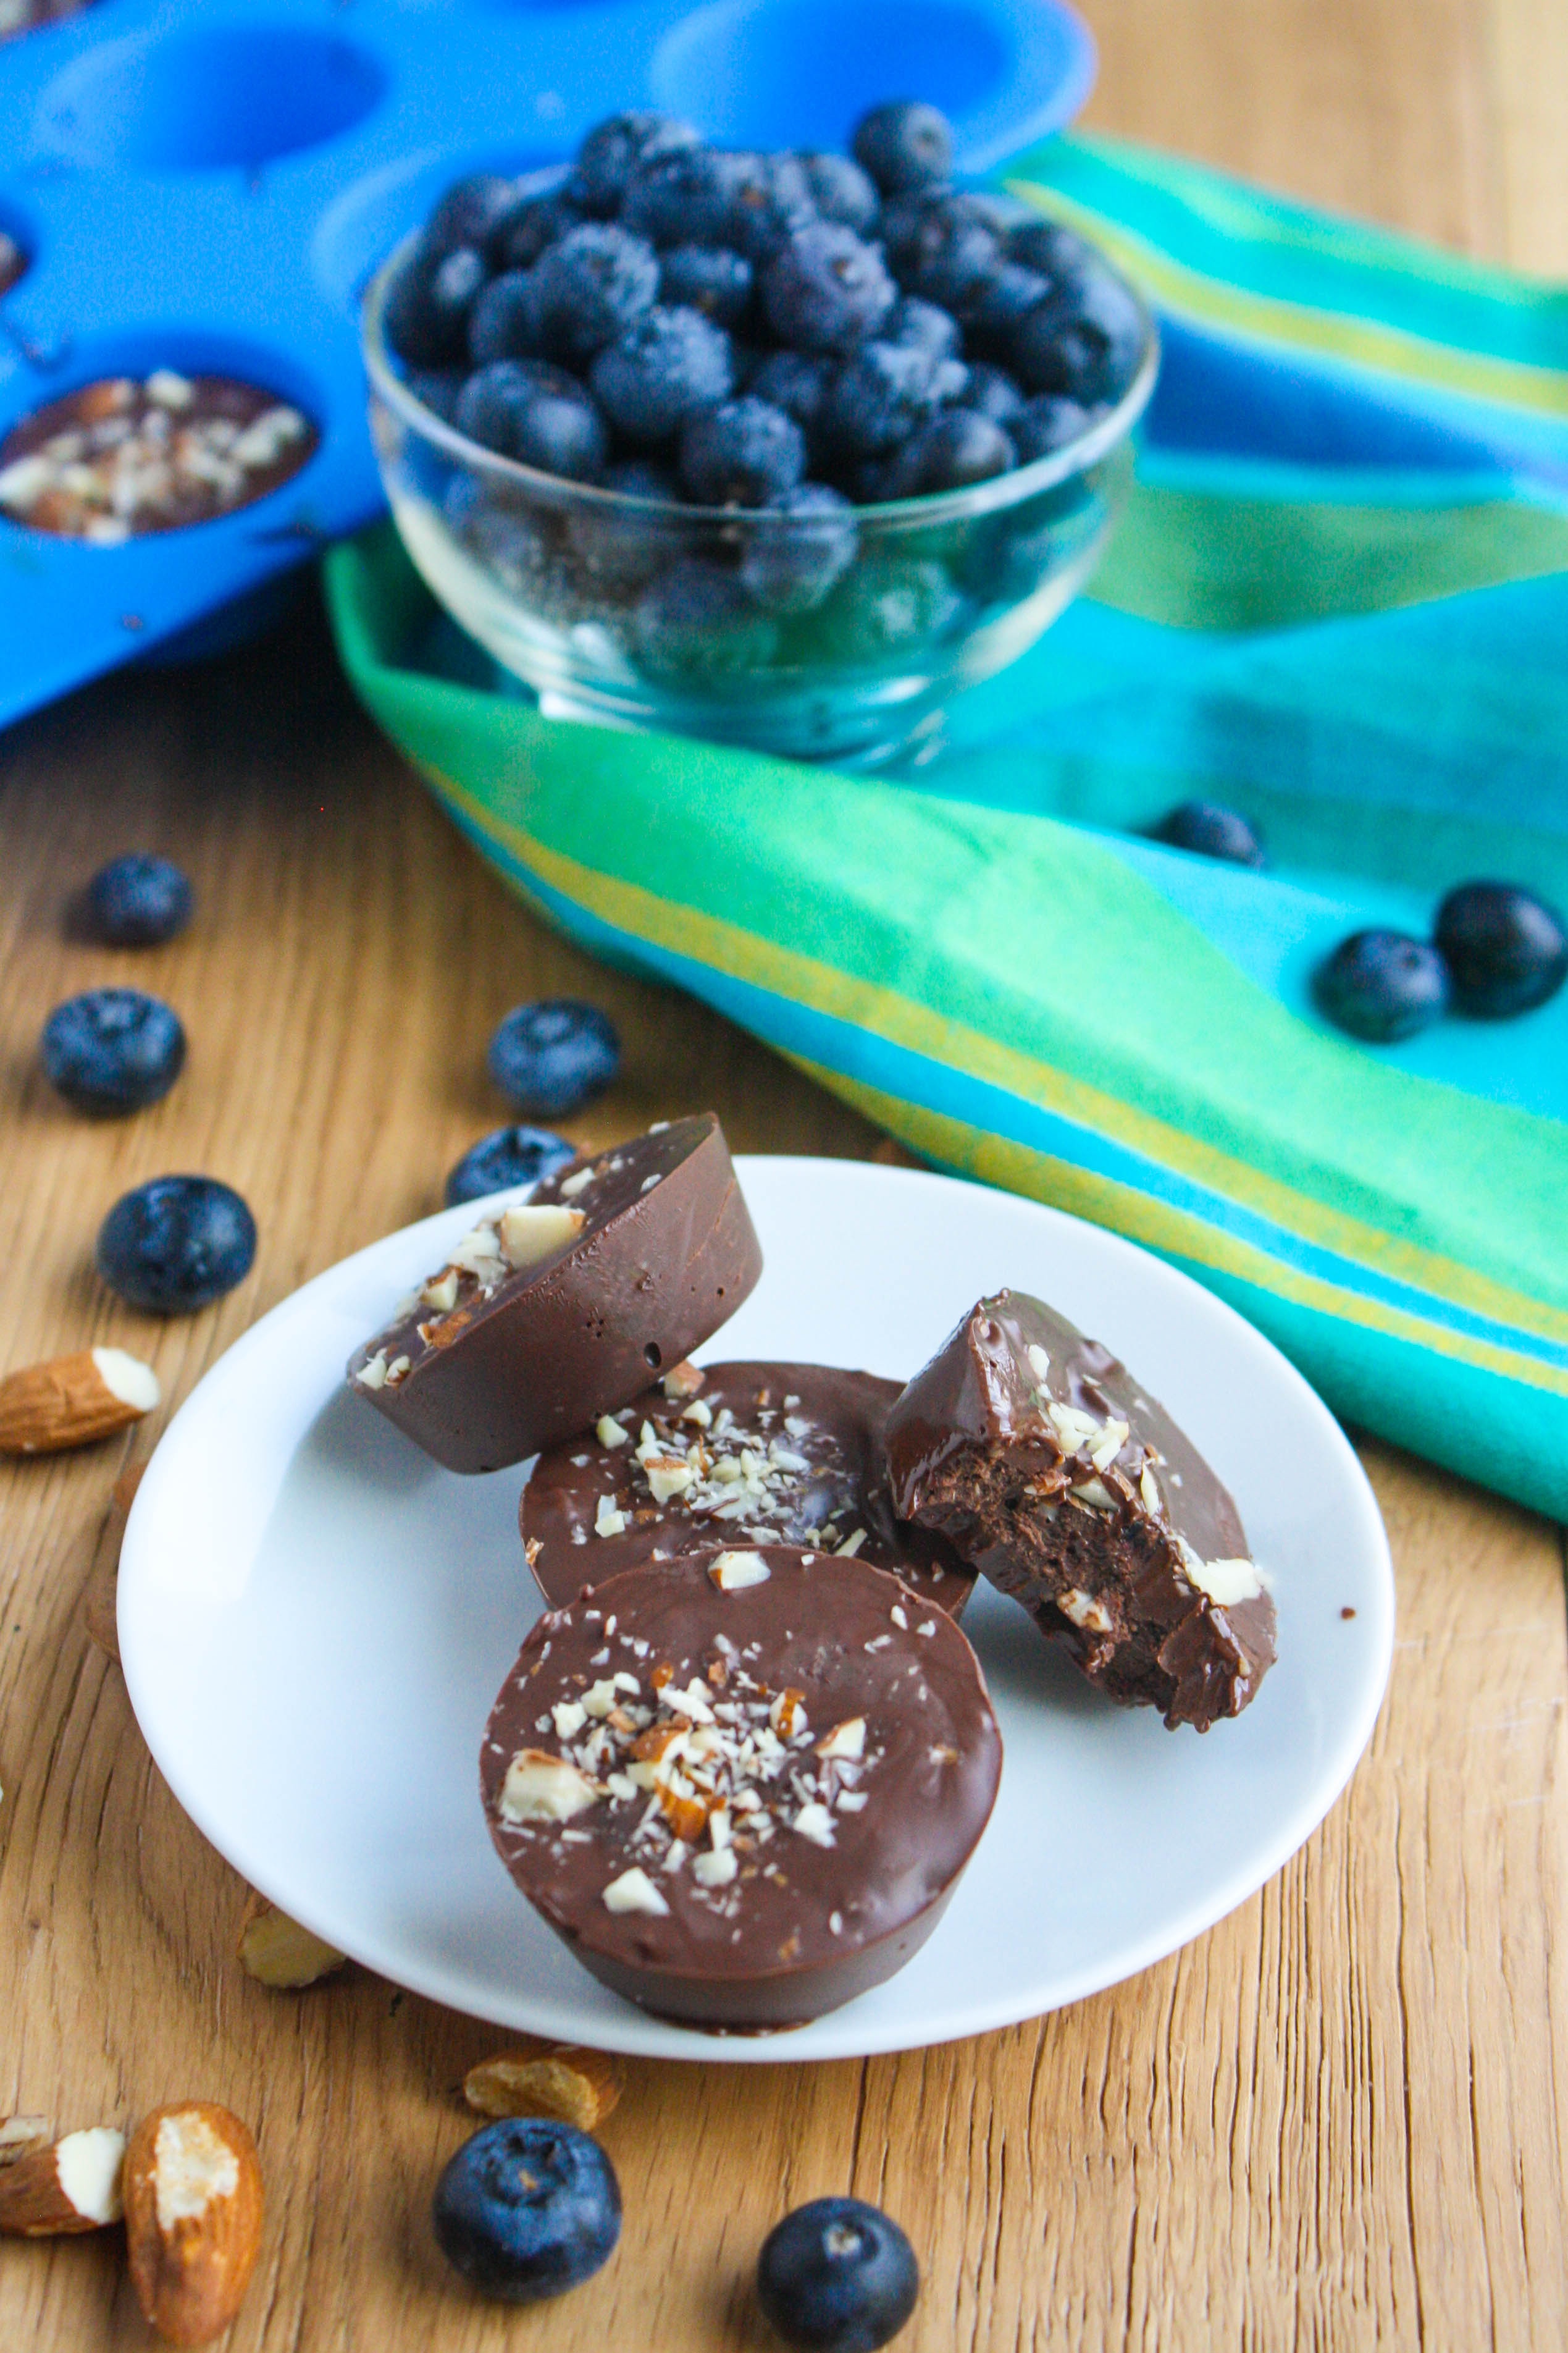 Chocolate Almond Blueberry Bites are a fun candy you'll love for a small treat. These chocolates are easy to make, too!